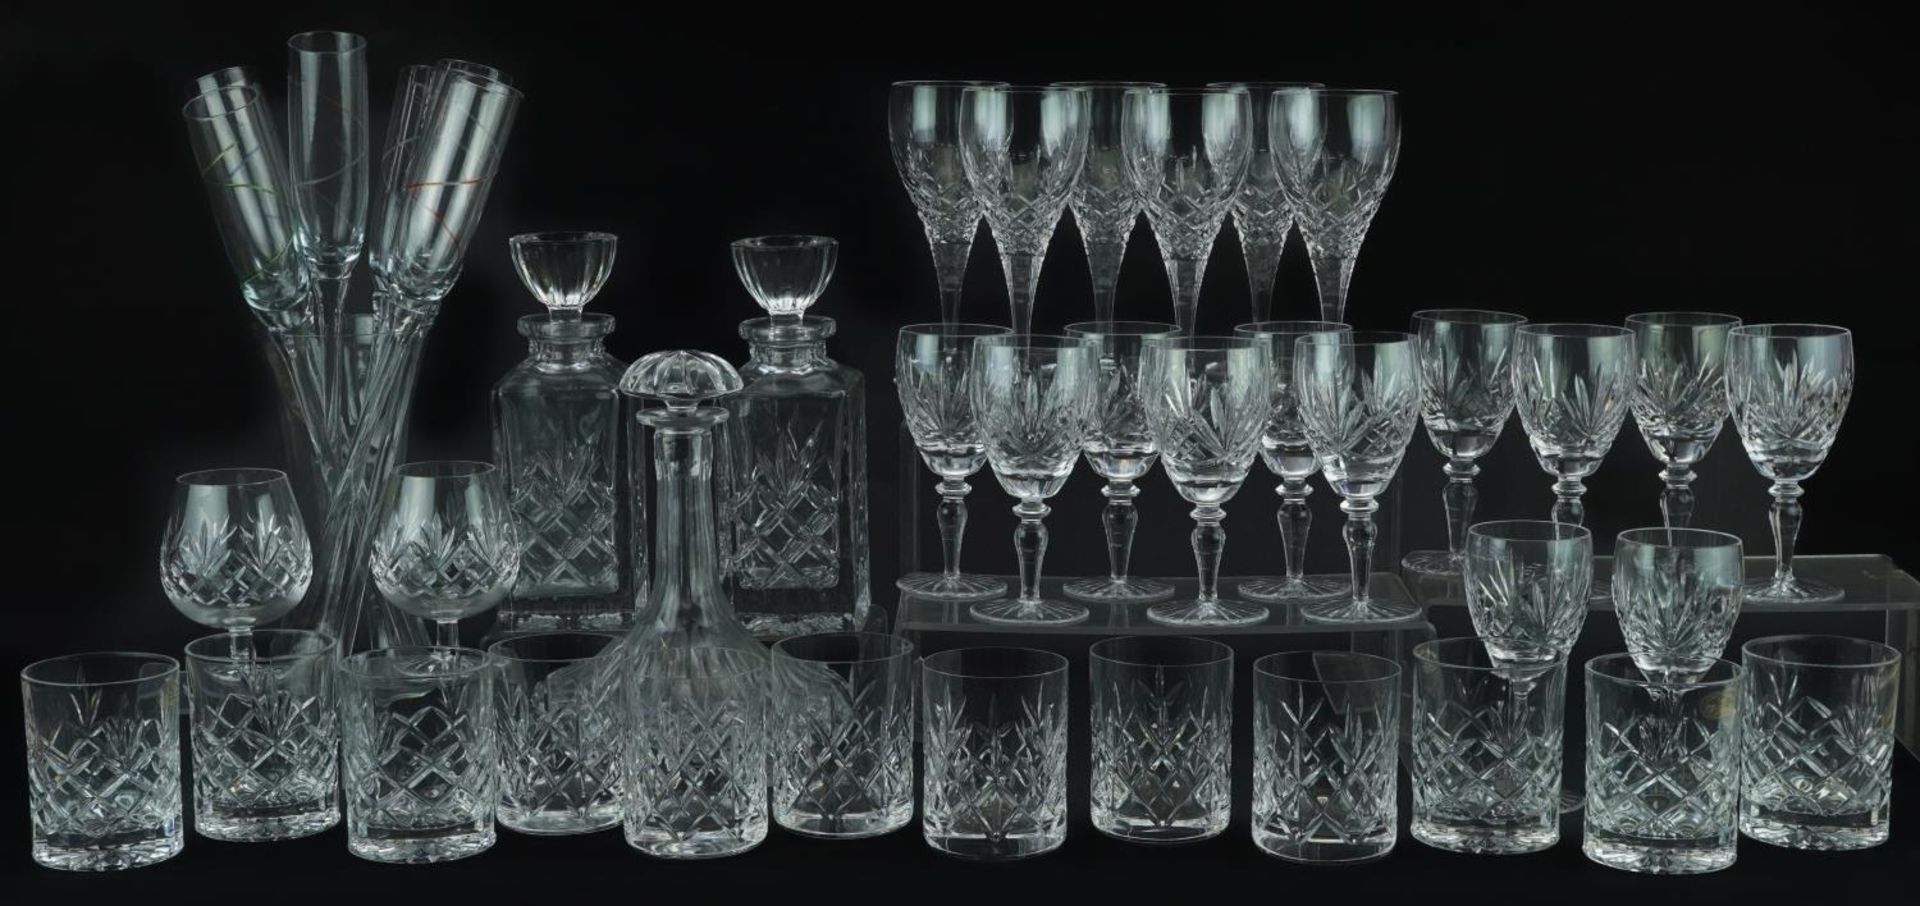 Glassware including Boyne Valley tumblers, three decanters and set of six Champagne flutes, the